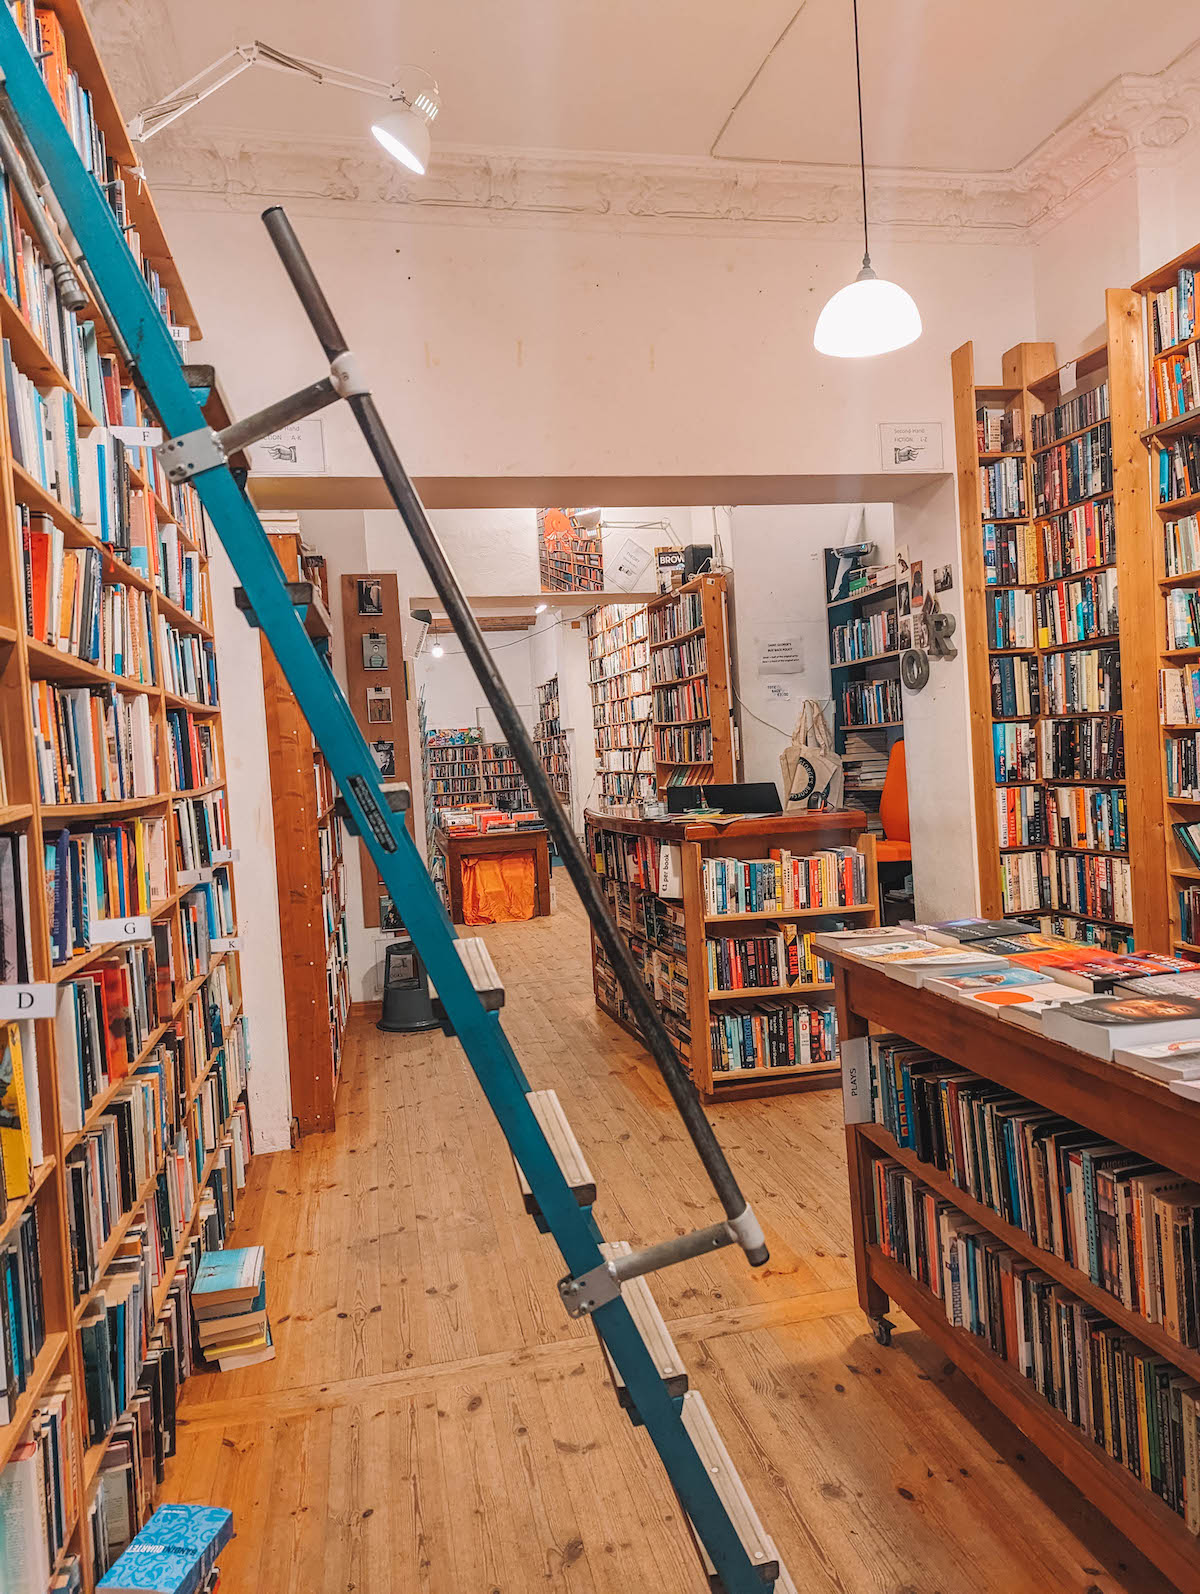 Inside Saint George's English bookstore in Berlin. There are bookshelves and a ladder in the foreground. 